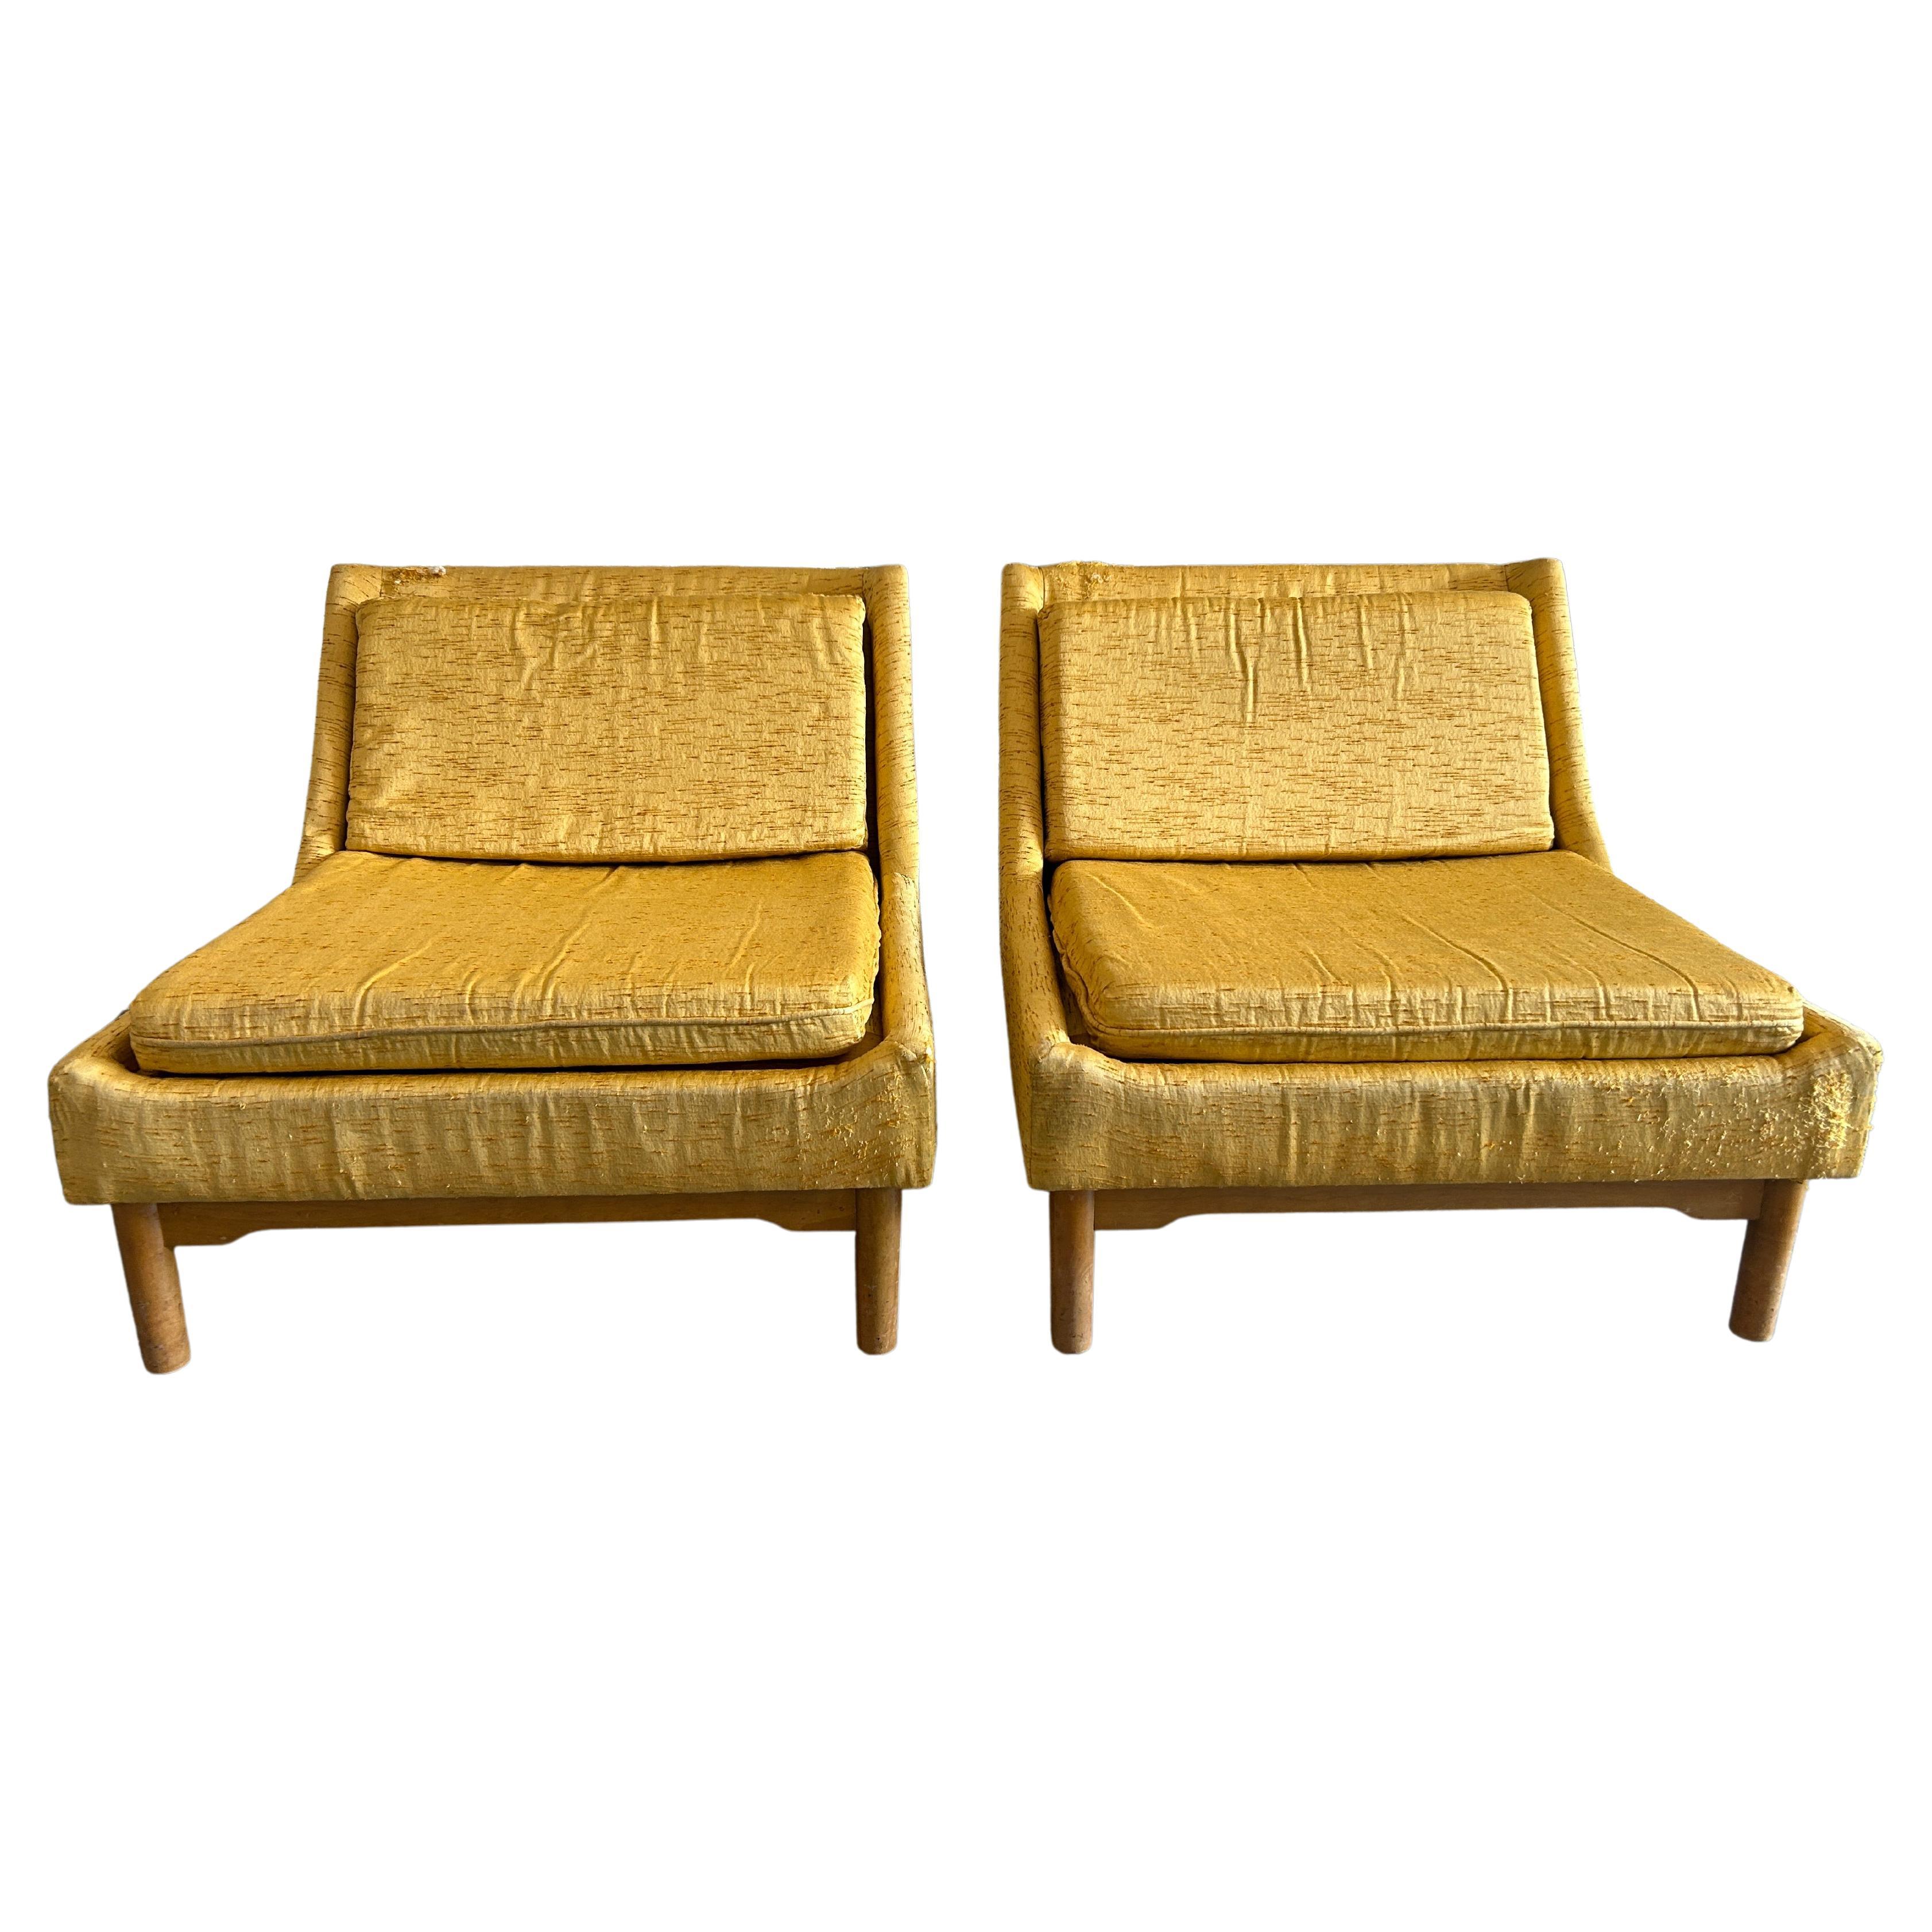 Mid century modern Pair of Low Slipper lounge chairs Maple base by Conant Ball